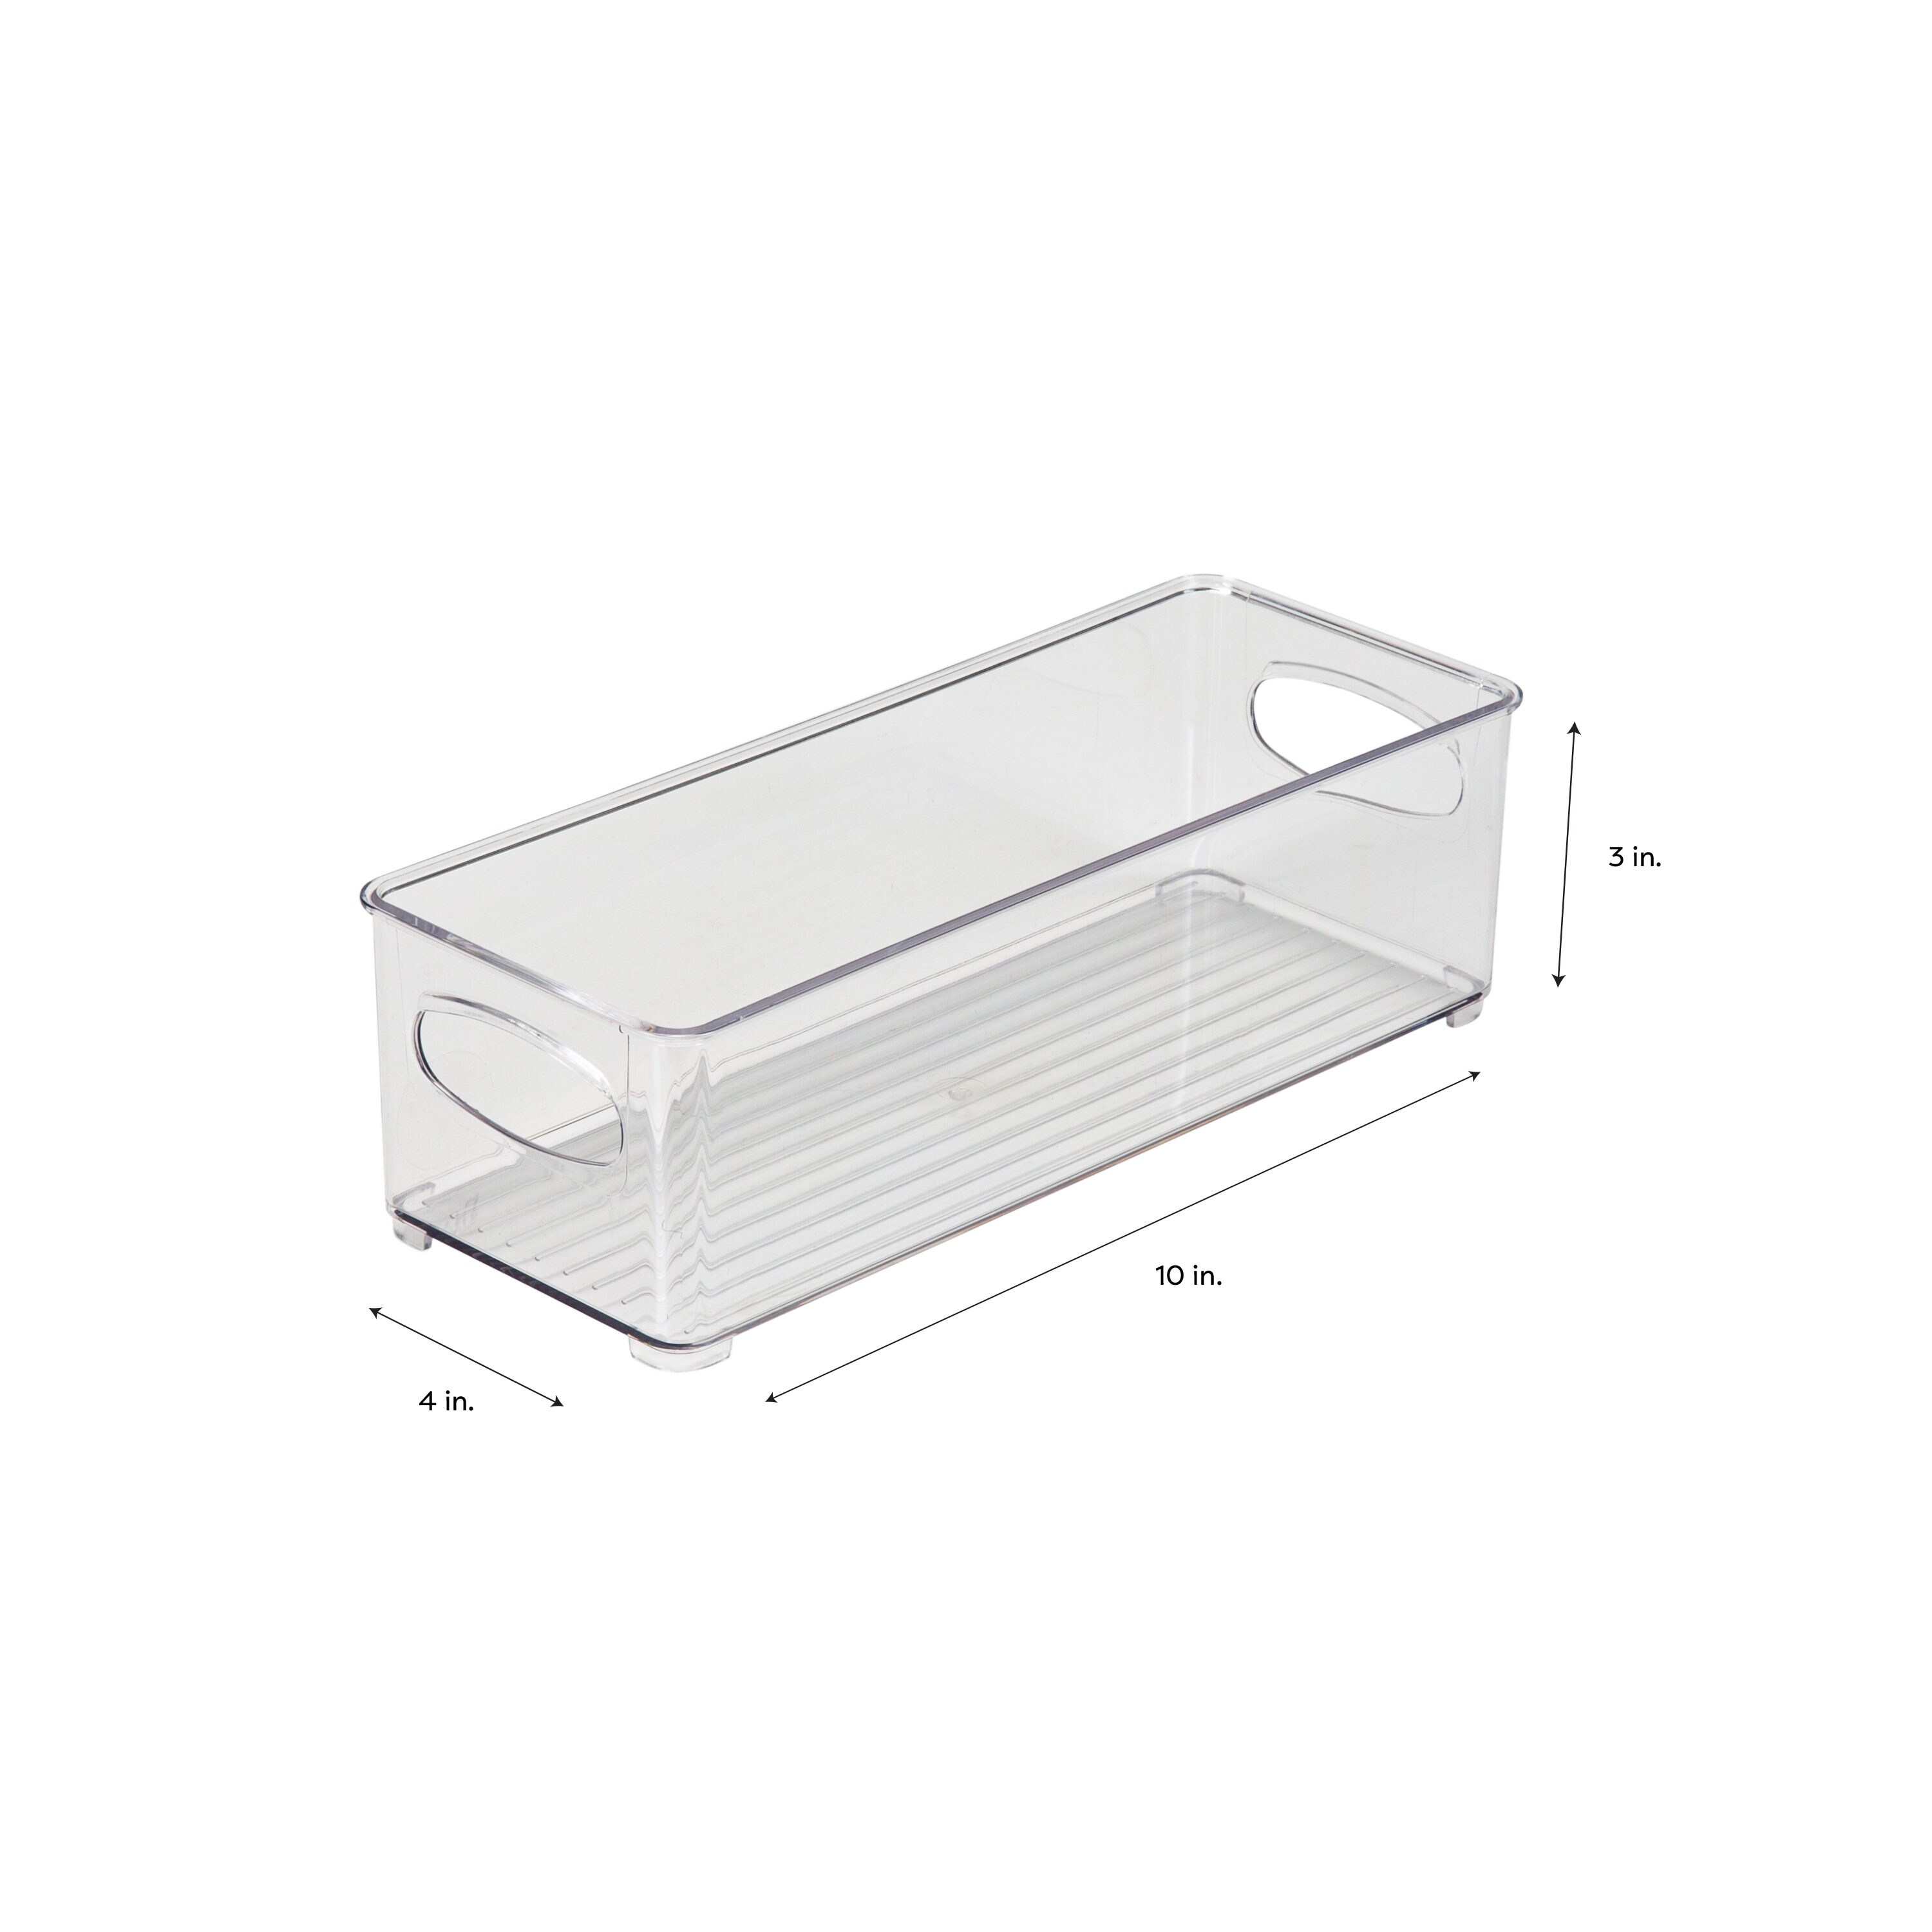 Stackable Plastic Bins, Clear, 10 3/4 x 8 1/4 x 7 for $17.20 Online